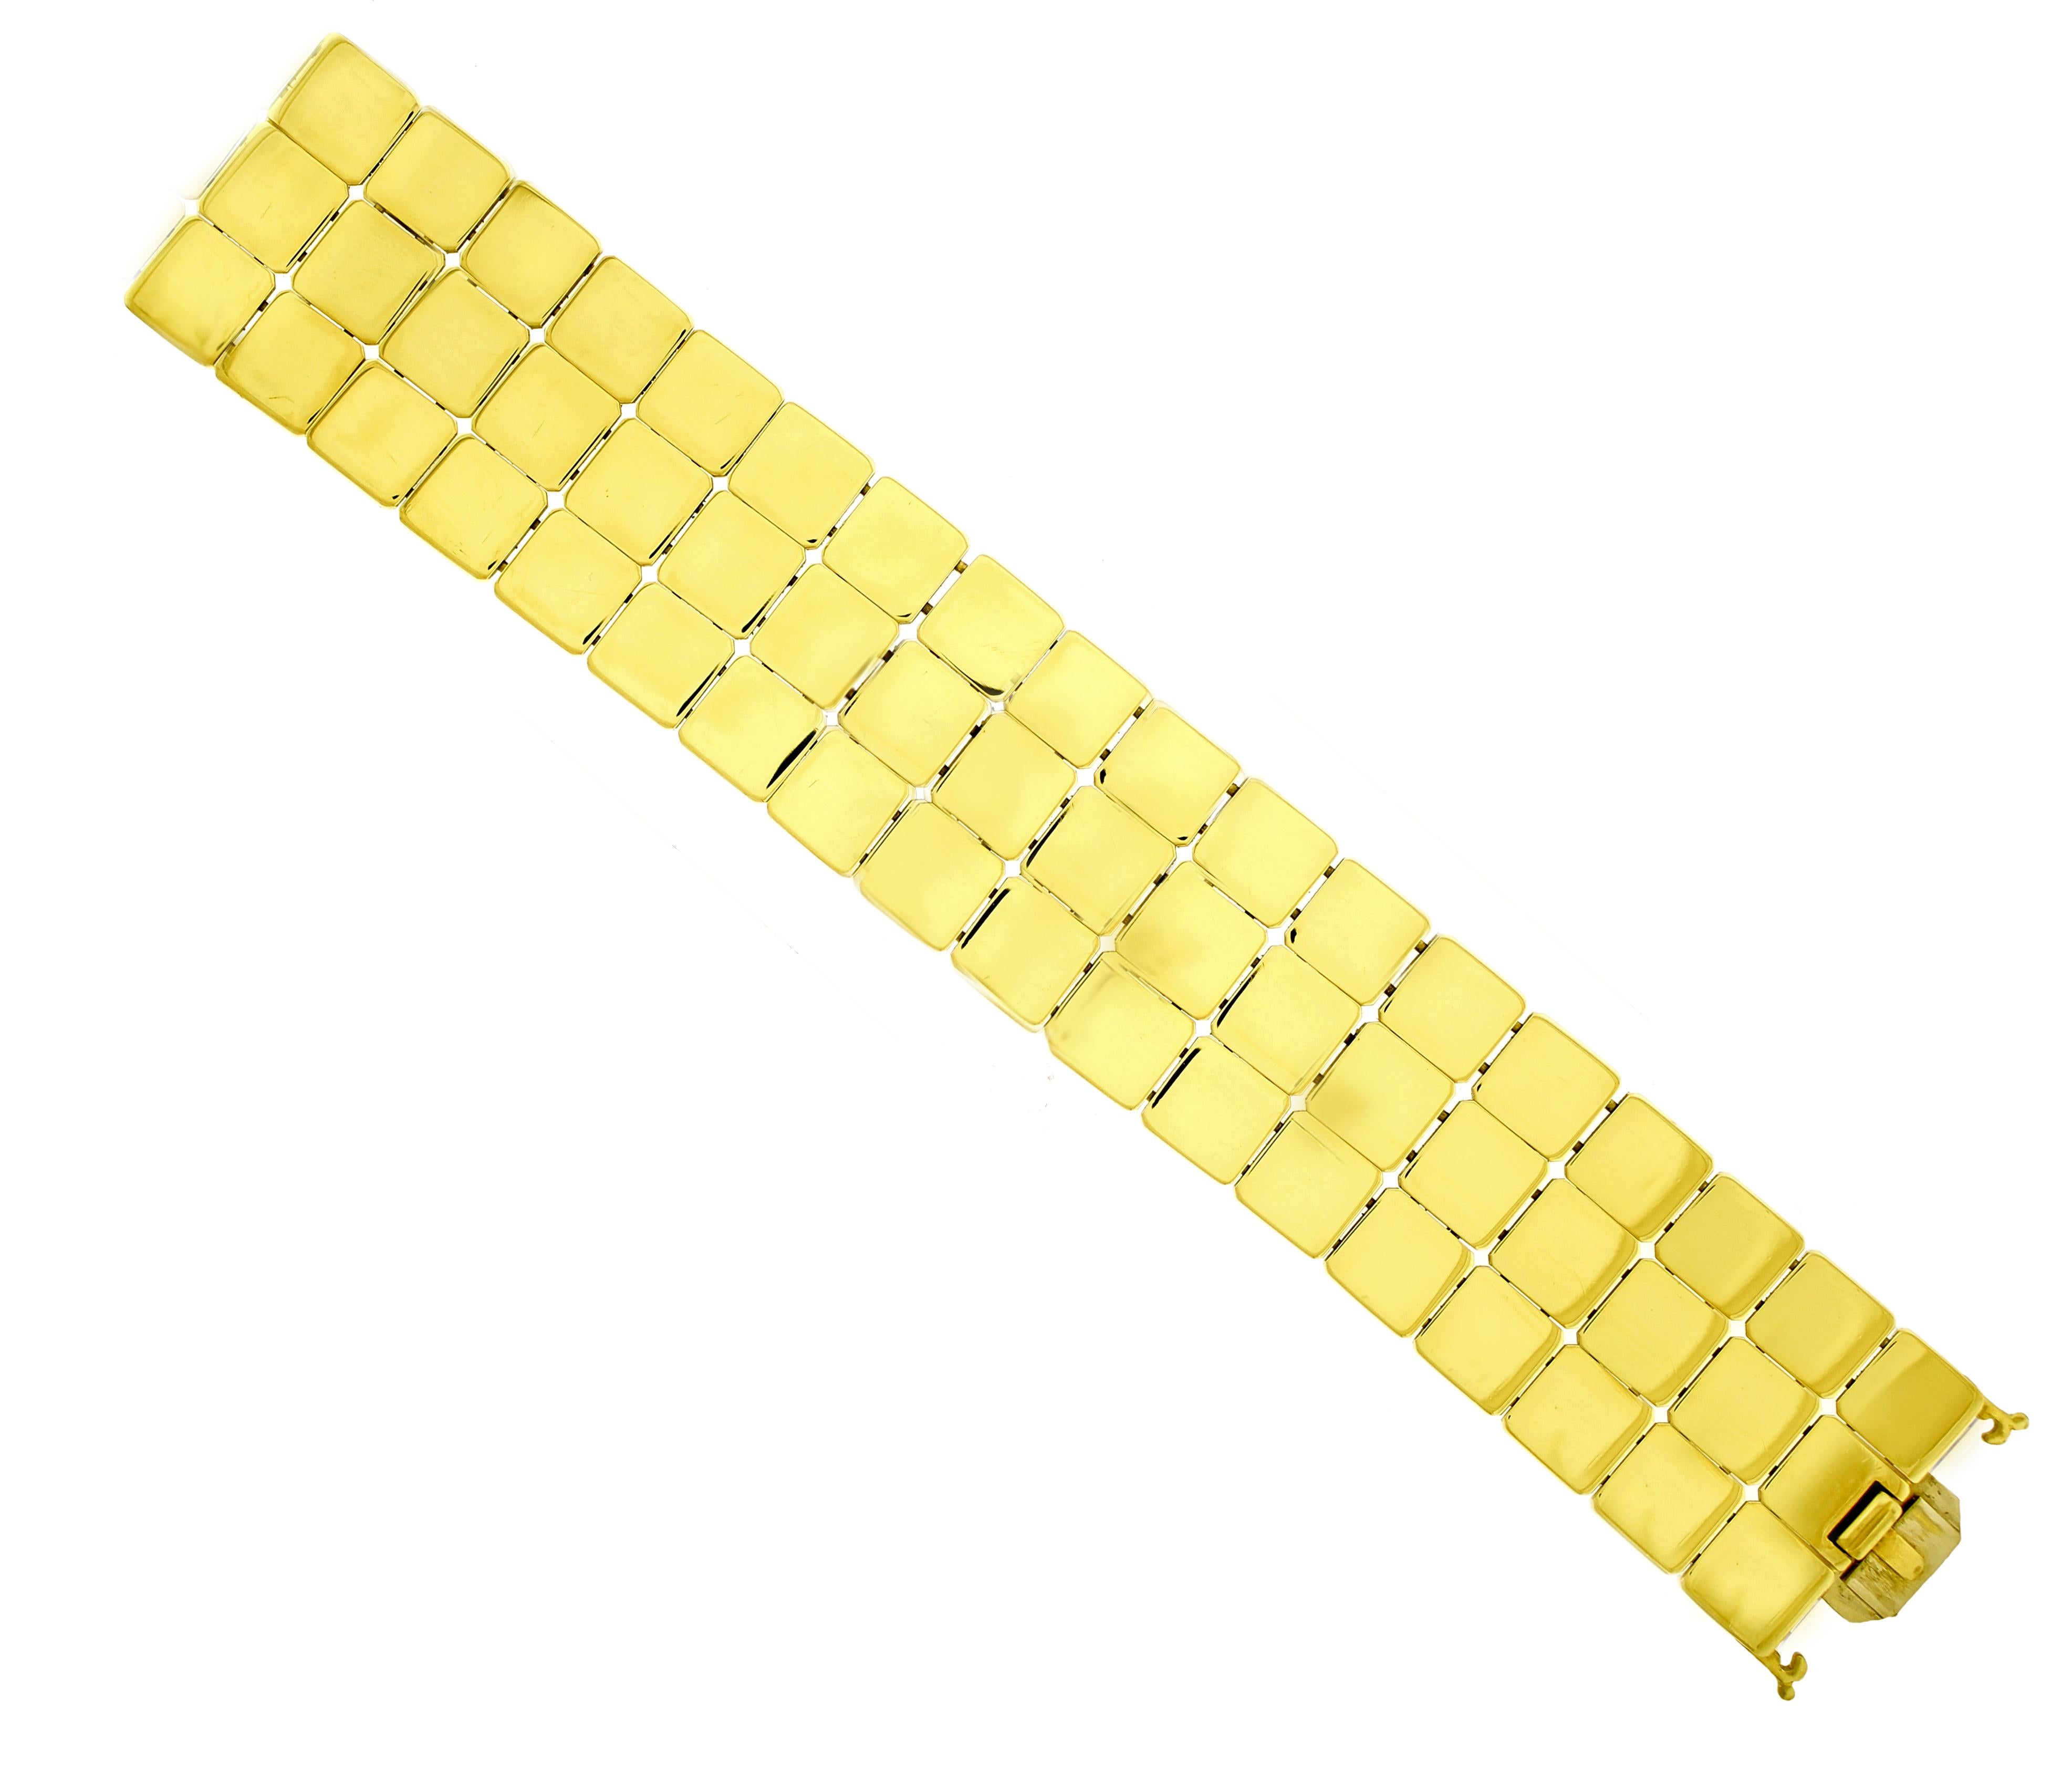 From Tiffany & Co, this 3 row square mirror bracelet is signed and dated 2002.
• Designer: Tiffany & Co.
• Metal: 18kt yellow gold
• Length: 7 1/8 inches
• Width: 1 1/8 inches
• Weight: 130.3 grams
• Packaging: Pampillonia Presentation Box
•